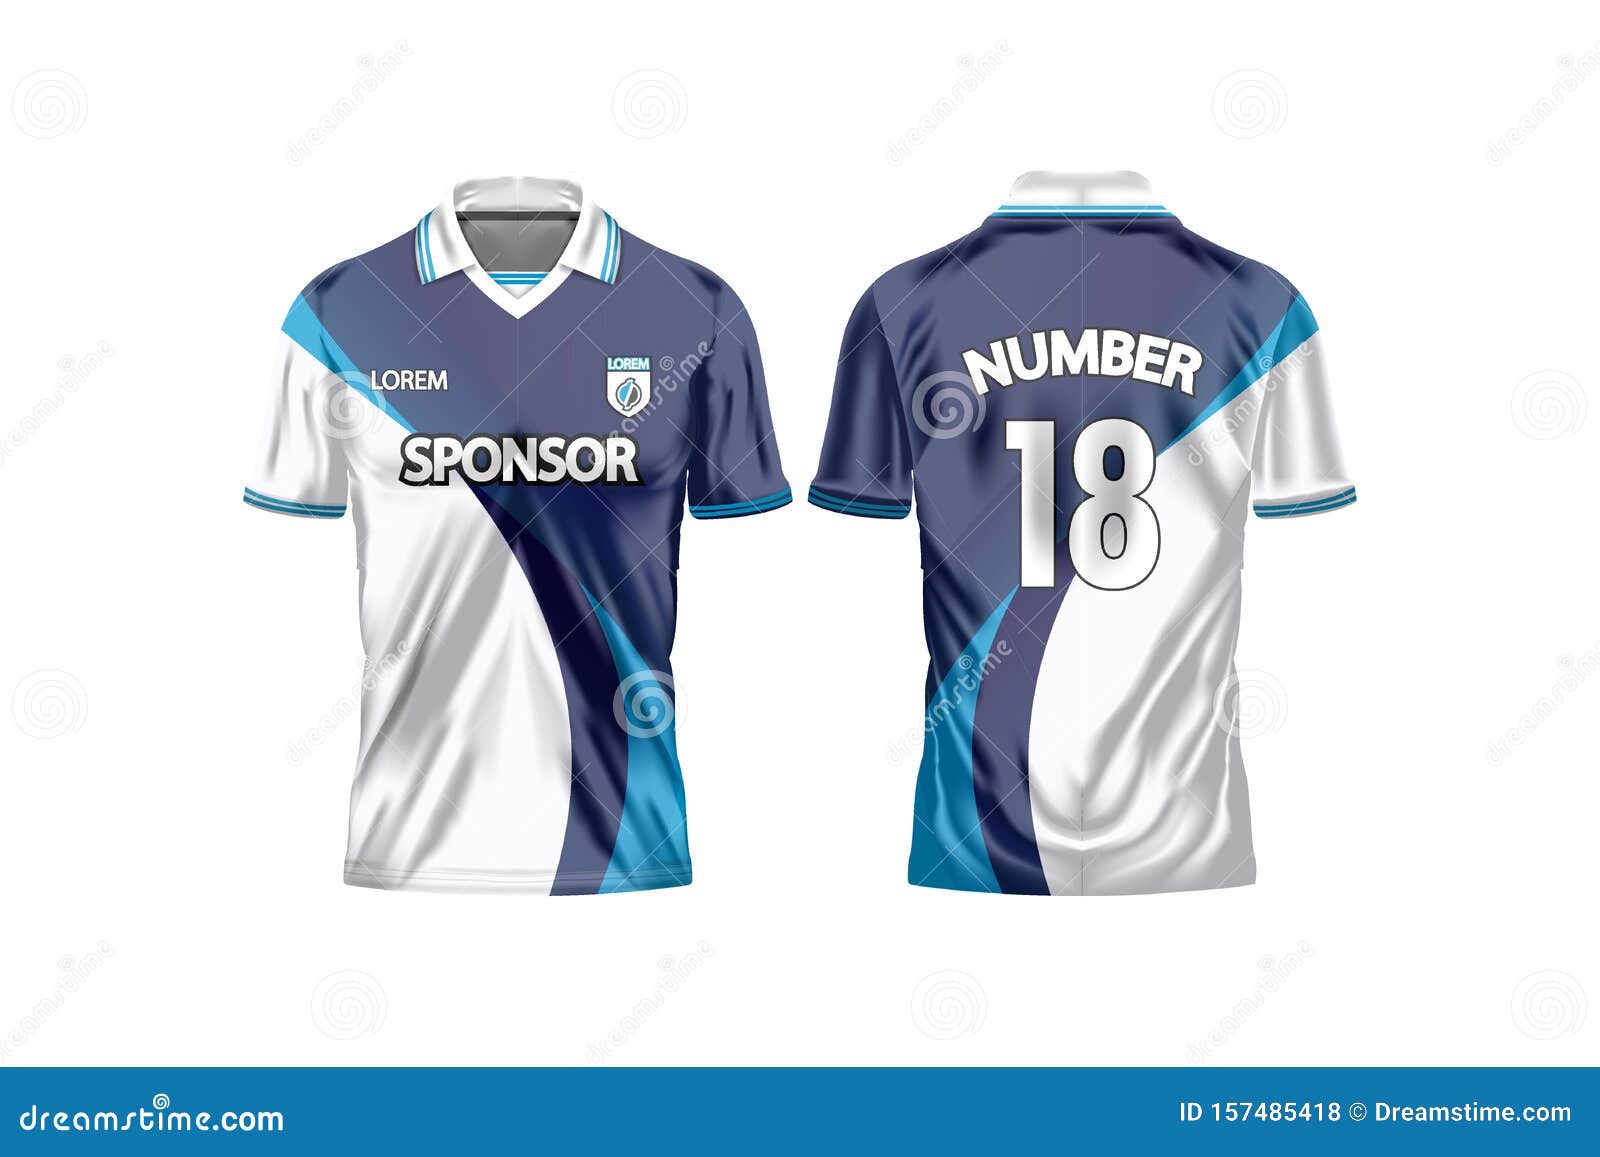 Soccer Jersey Template For Football Club Or Sportswear Uniforms